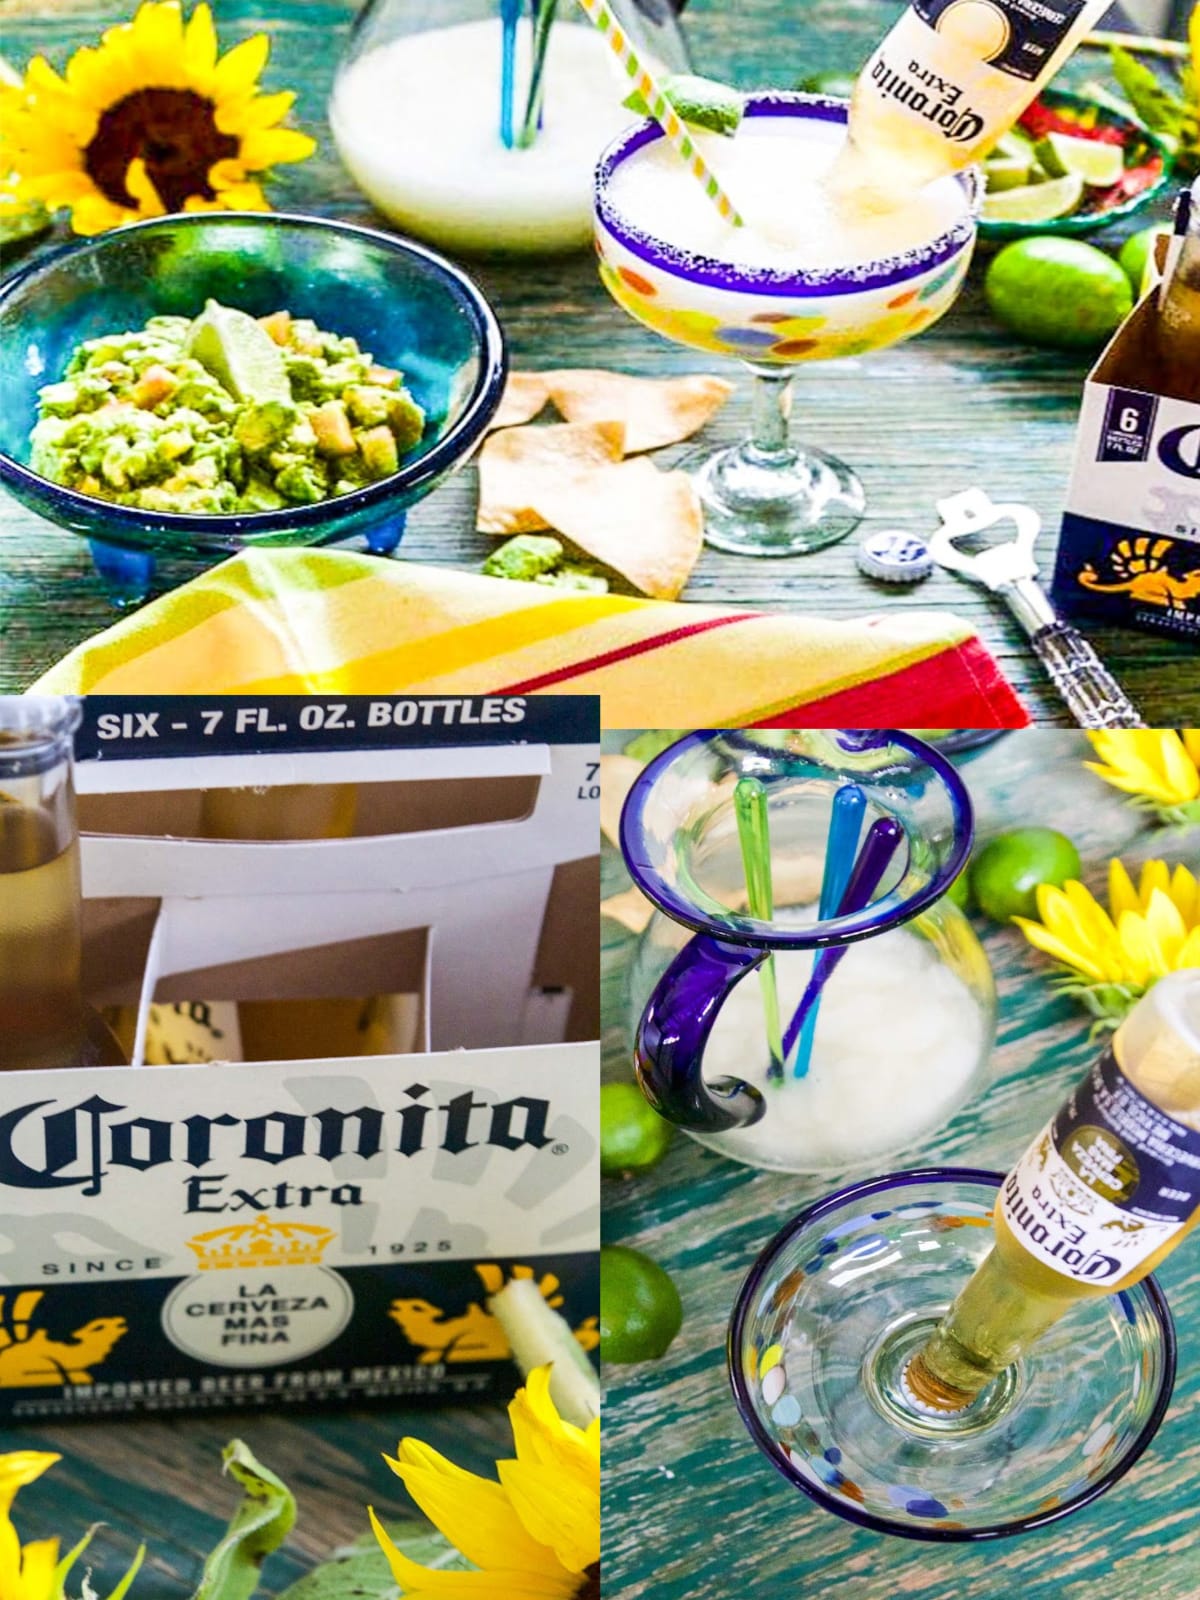 A list of ingredients to make CoronaRita margaritas on a picture of the drink recipe.